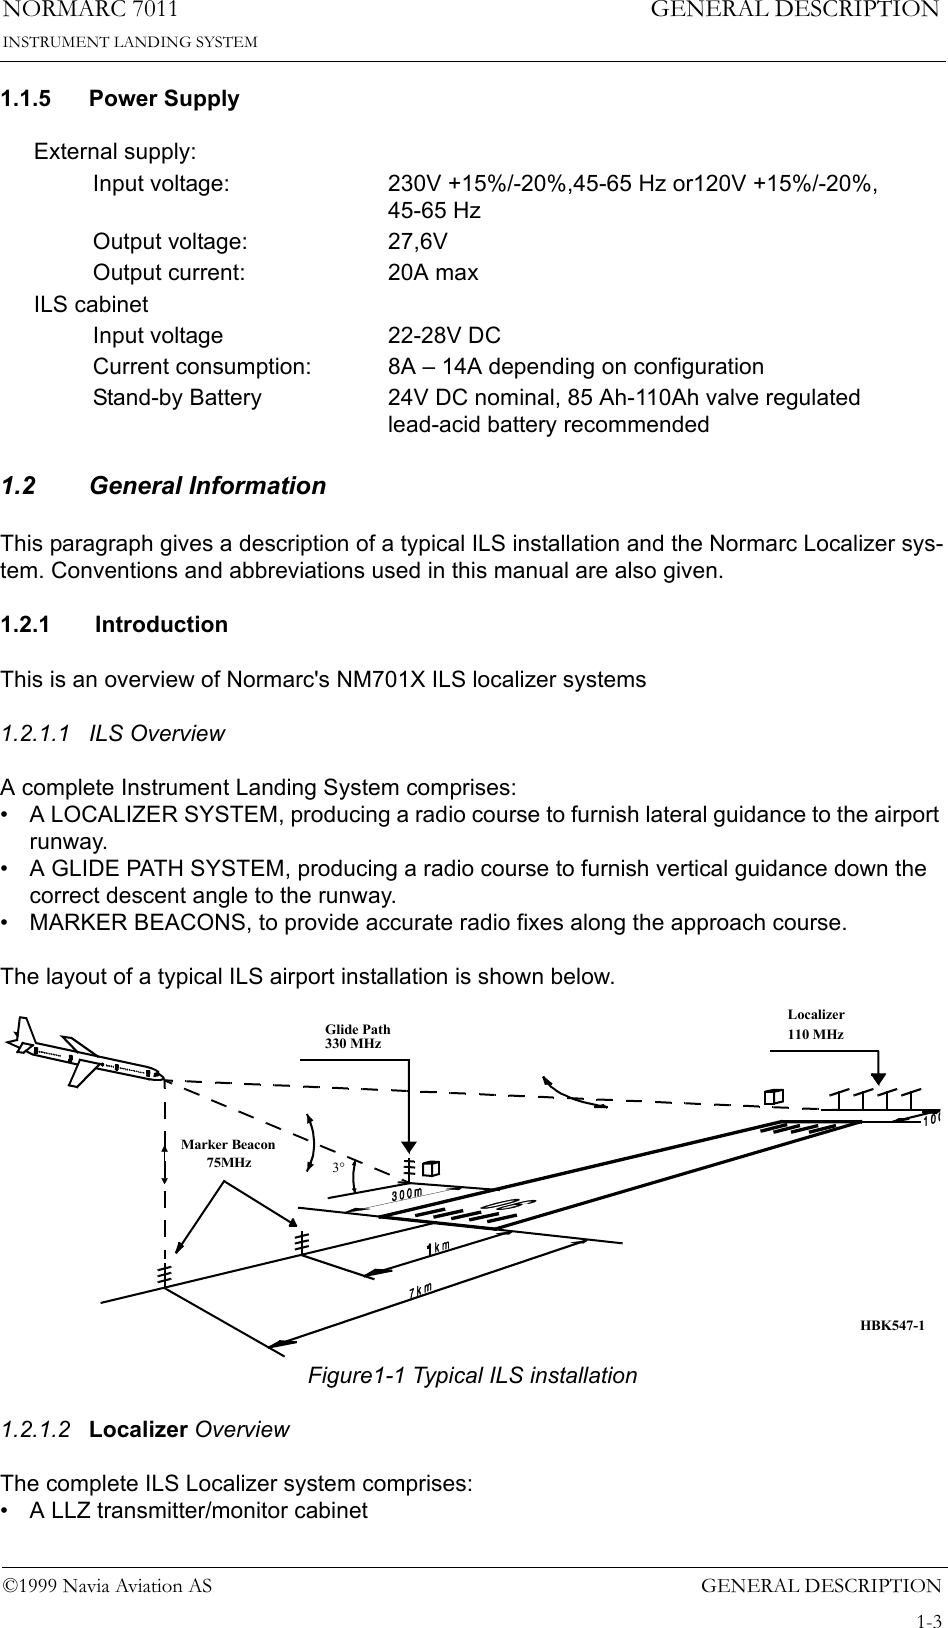 GENERAL DESCRIPTIONNORMARC 70111-3©1999 Navia Aviation ASINSTRUMENT LANDING SYSTEMGENERAL DESCRIPTION1.1.5 Power Supply1.2 General InformationThis paragraph gives a description of a typical ILS installation and the Normarc Localizer sys-tem. Conventions and abbreviations used in this manual are also given.1.2.1  IntroductionThis is an overview of Normarc&apos;s NM701X ILS localizer systems1.2.1.1 ILS OverviewA complete Instrument Landing System comprises:• A LOCALIZER SYSTEM, producing a radio course to furnish lateral guidance to the airport runway.• A GLIDE PATH SYSTEM, producing a radio course to furnish vertical guidance down the correct descent angle to the runway.• MARKER BEACONS, to provide accurate radio fixes along the approach course.The layout of a typical ILS airport installation is shown below.Figure1-1 Typical ILS installation1.2.1.2 Localizer OverviewThe complete ILS Localizer system comprises:• A LLZ transmitter/monitor cabinetExternal supply:Input voltage: 230V +15%/-20%,45-65 Hz or120V +15%/-20%, 45-65 HzOutput voltage: 27,6VOutput current: 20A maxILS cabinetInput voltage 22-28V DCCurrent consumption: 8A – 14A depending on configurationStand-by Battery 24V DC nominal, 85 Ah-110Ah valve regulated lead-acid battery recommendedLocalizer110 MHzGlide Path330 MHzMarker Beacon75MHz3°HBK547-1